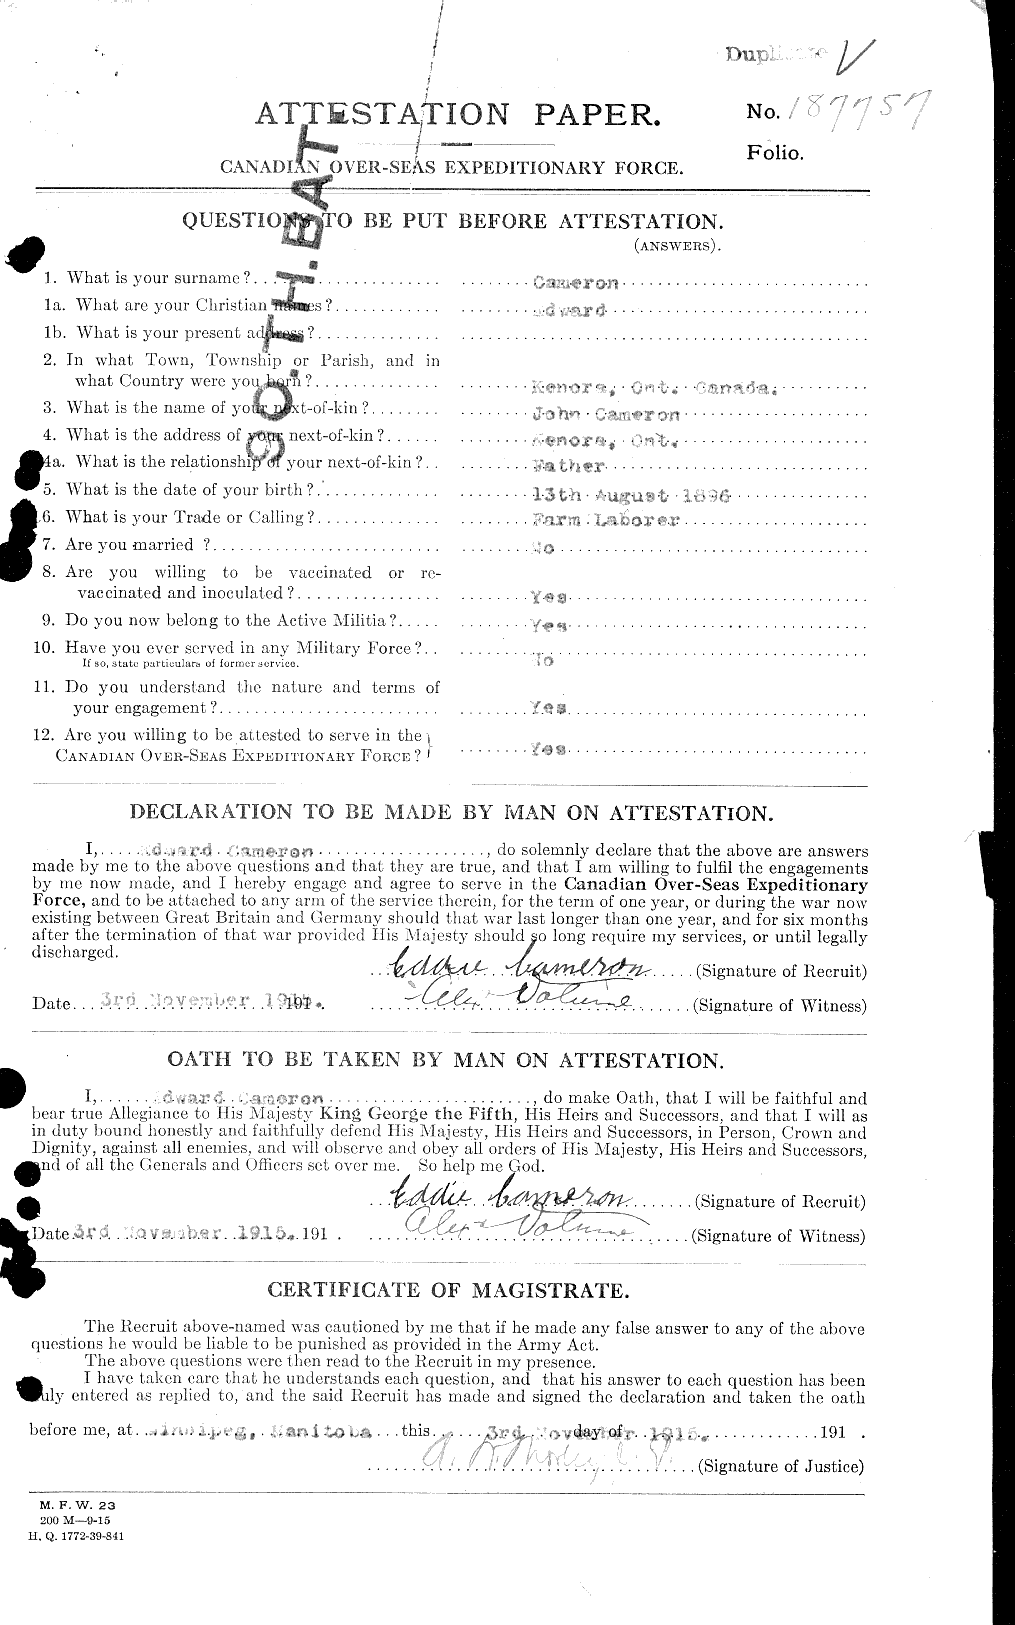 Personnel Records of the First World War - CEF 006521a